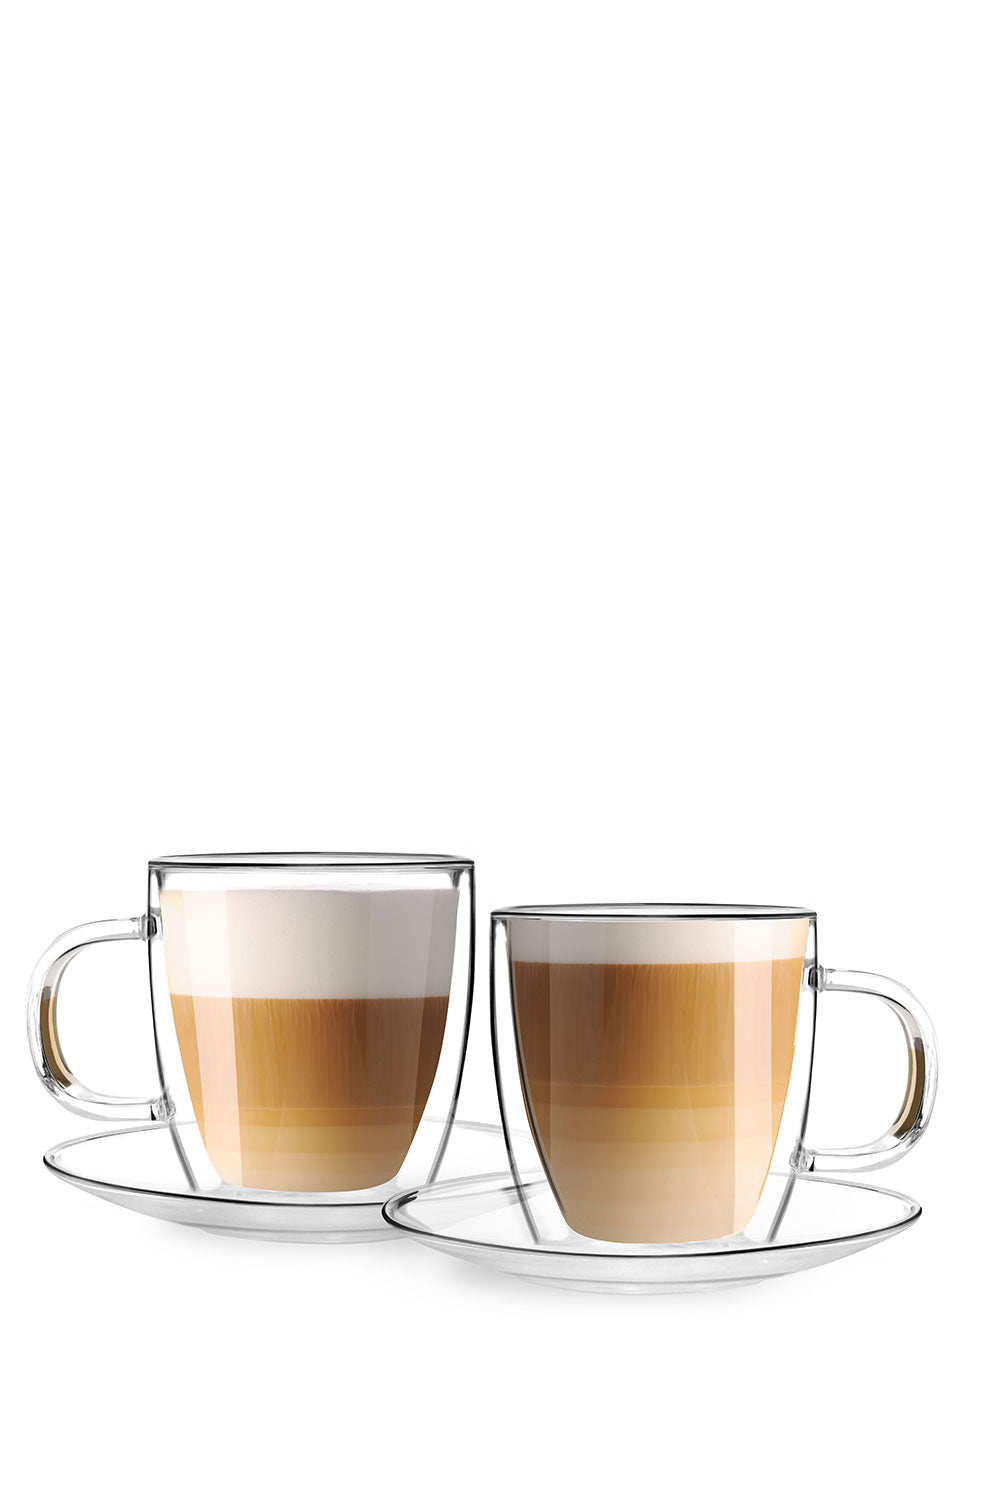 Set Of 2 Amo Double Wall Glasses With Saucer 250ml - Maison7